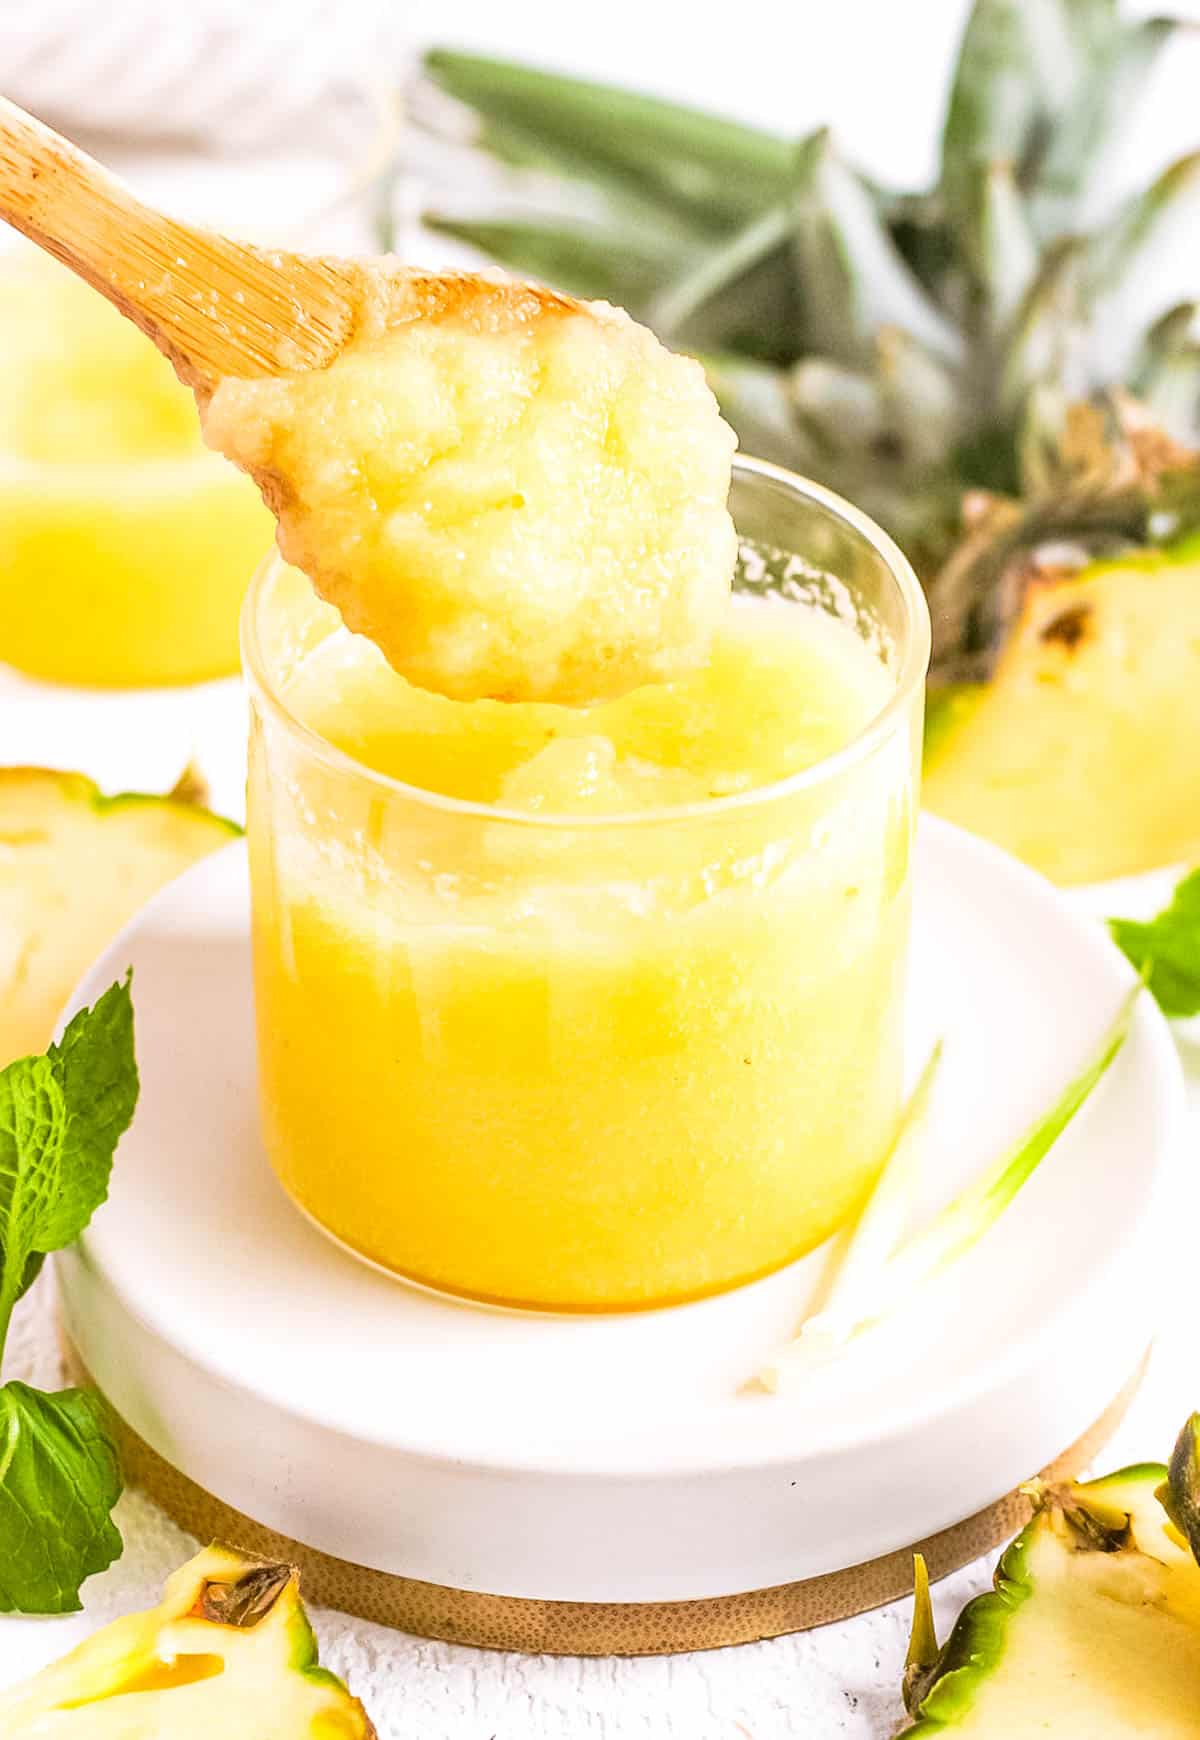 Pineapple puree served in a glass jar with a wooden spoon.